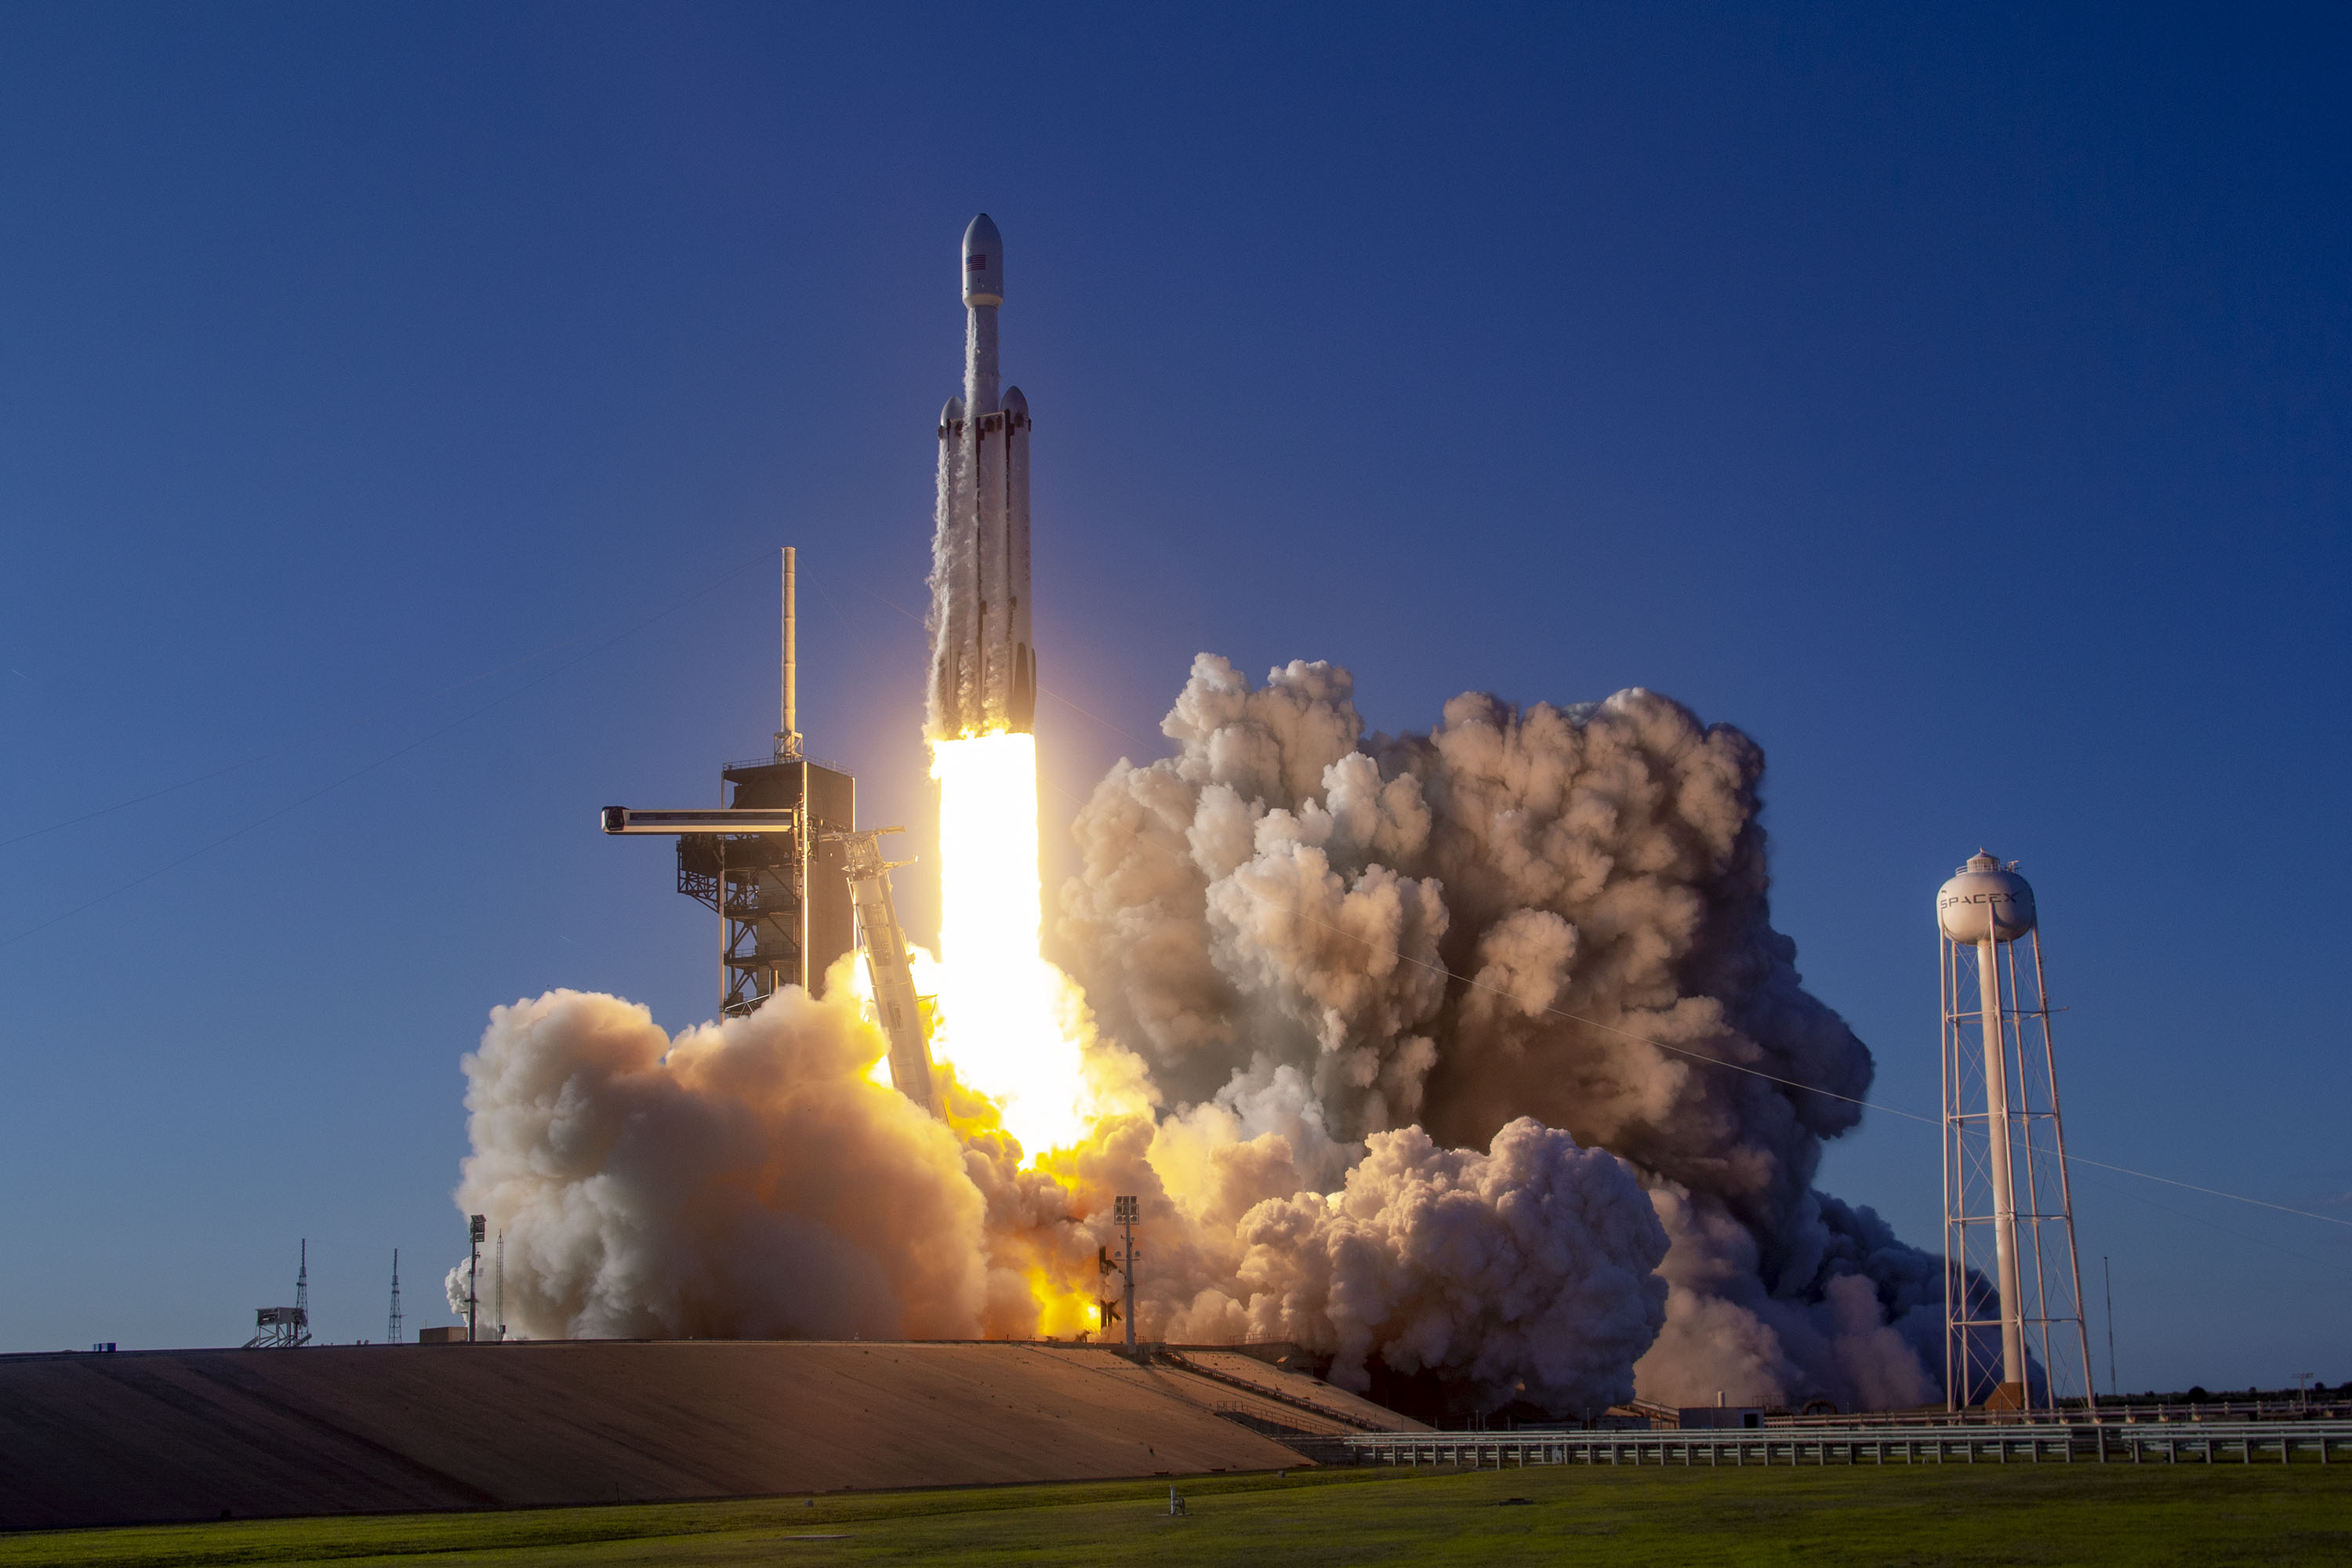 SpaceX's Falcon Heavy will launch the NASA Psyche Mission to study an asteroid between Mars and Jupiter